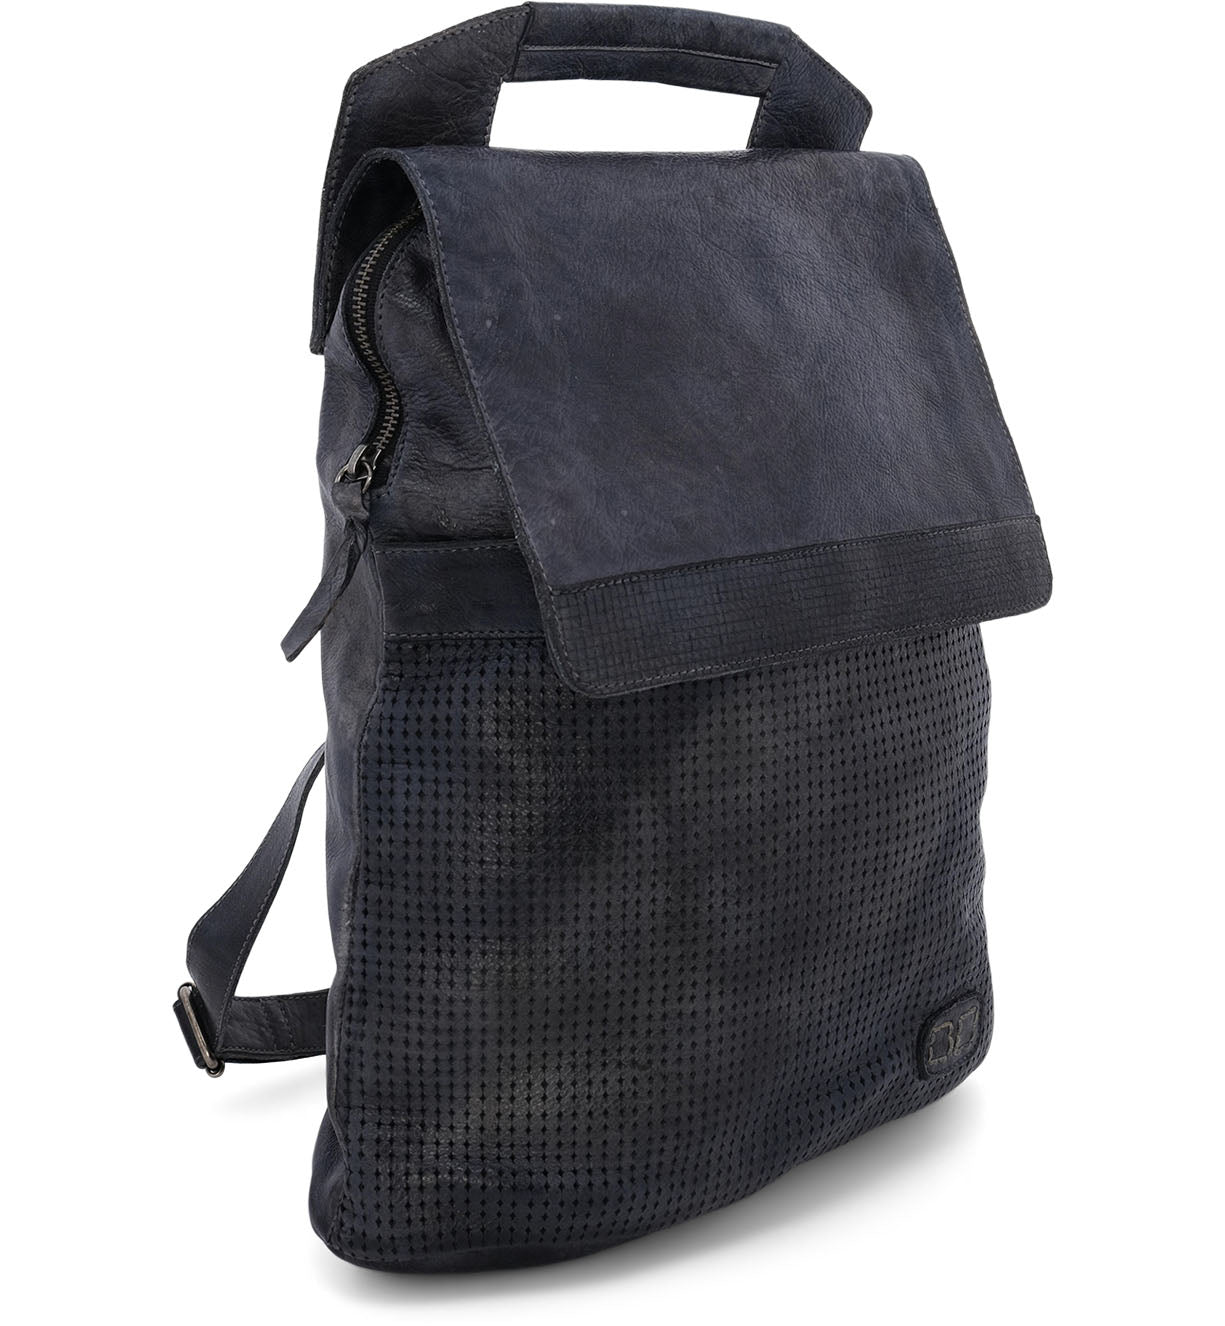 A Patsy blue leather backpack by Bed Stu with a zippered compartment.